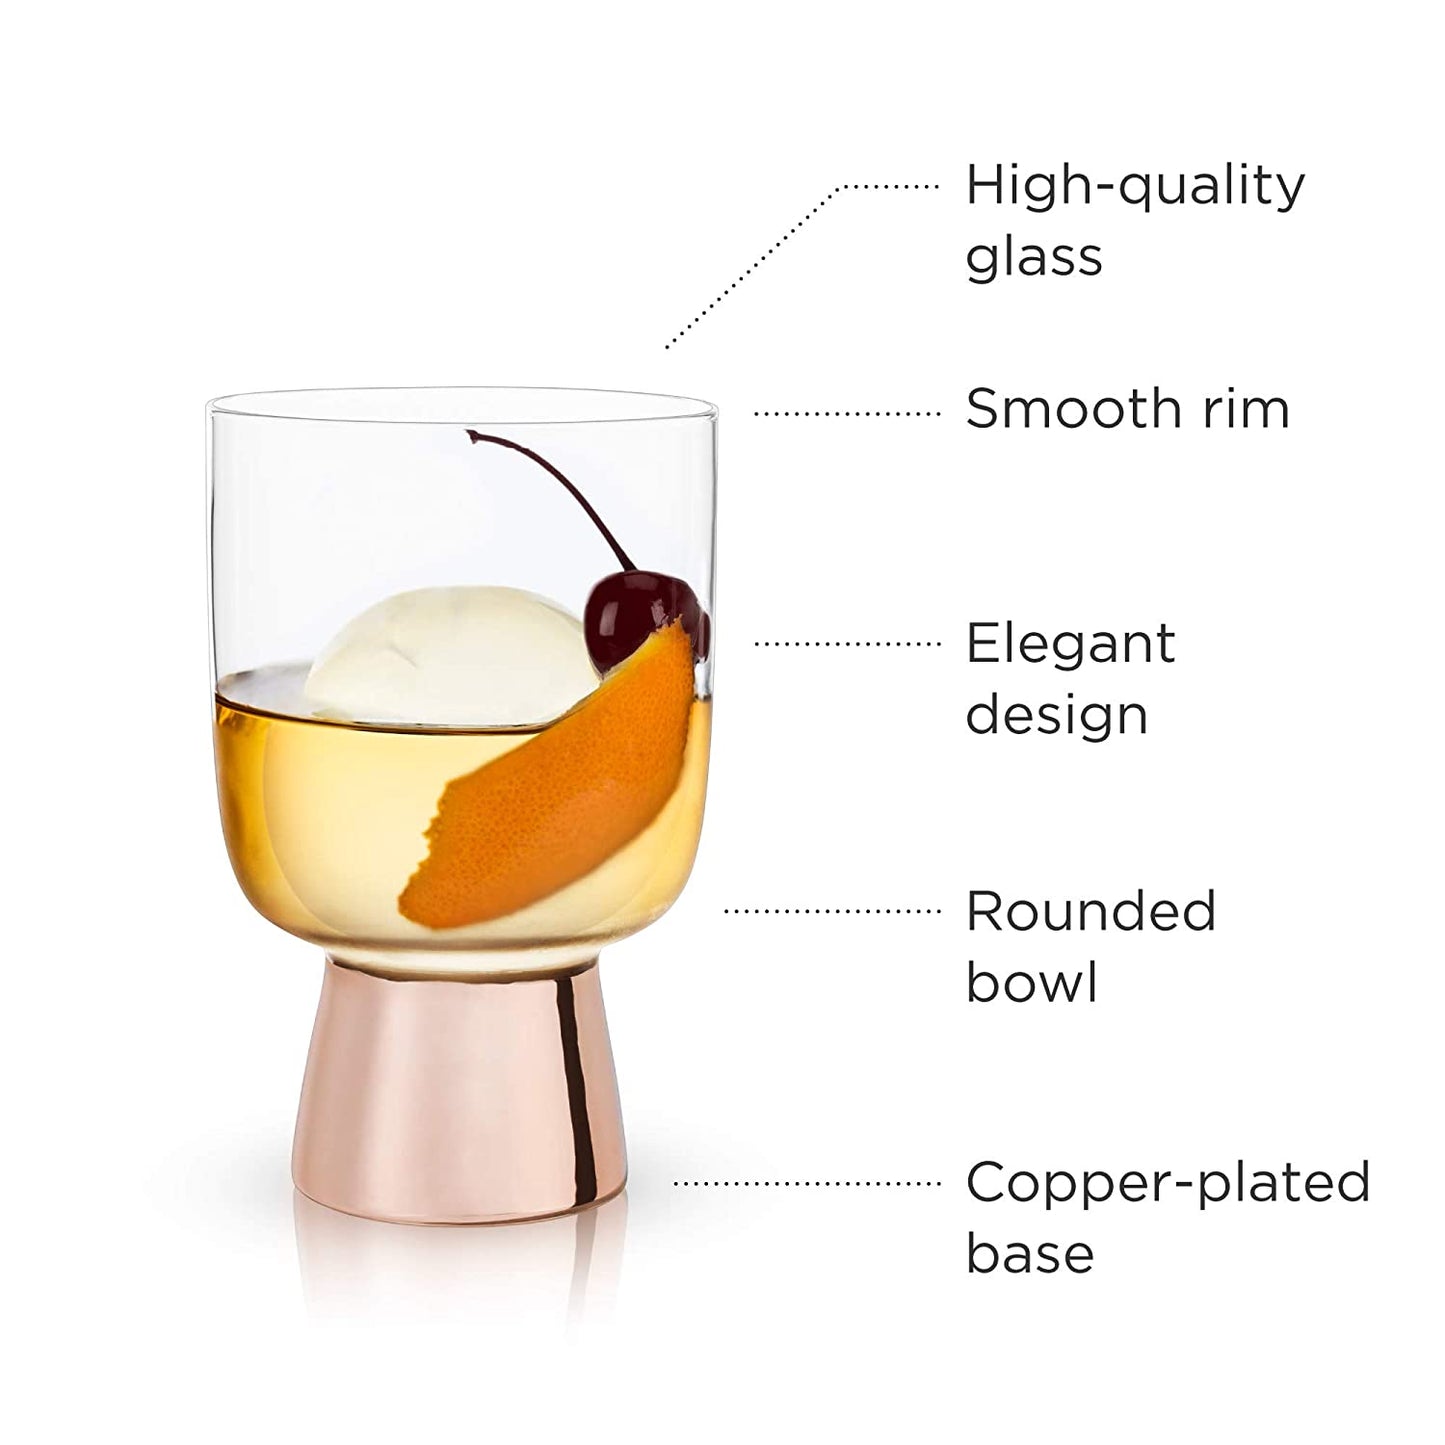 Set of 2 Raye Copper Footed Cocktail Tumblers in Gift Box